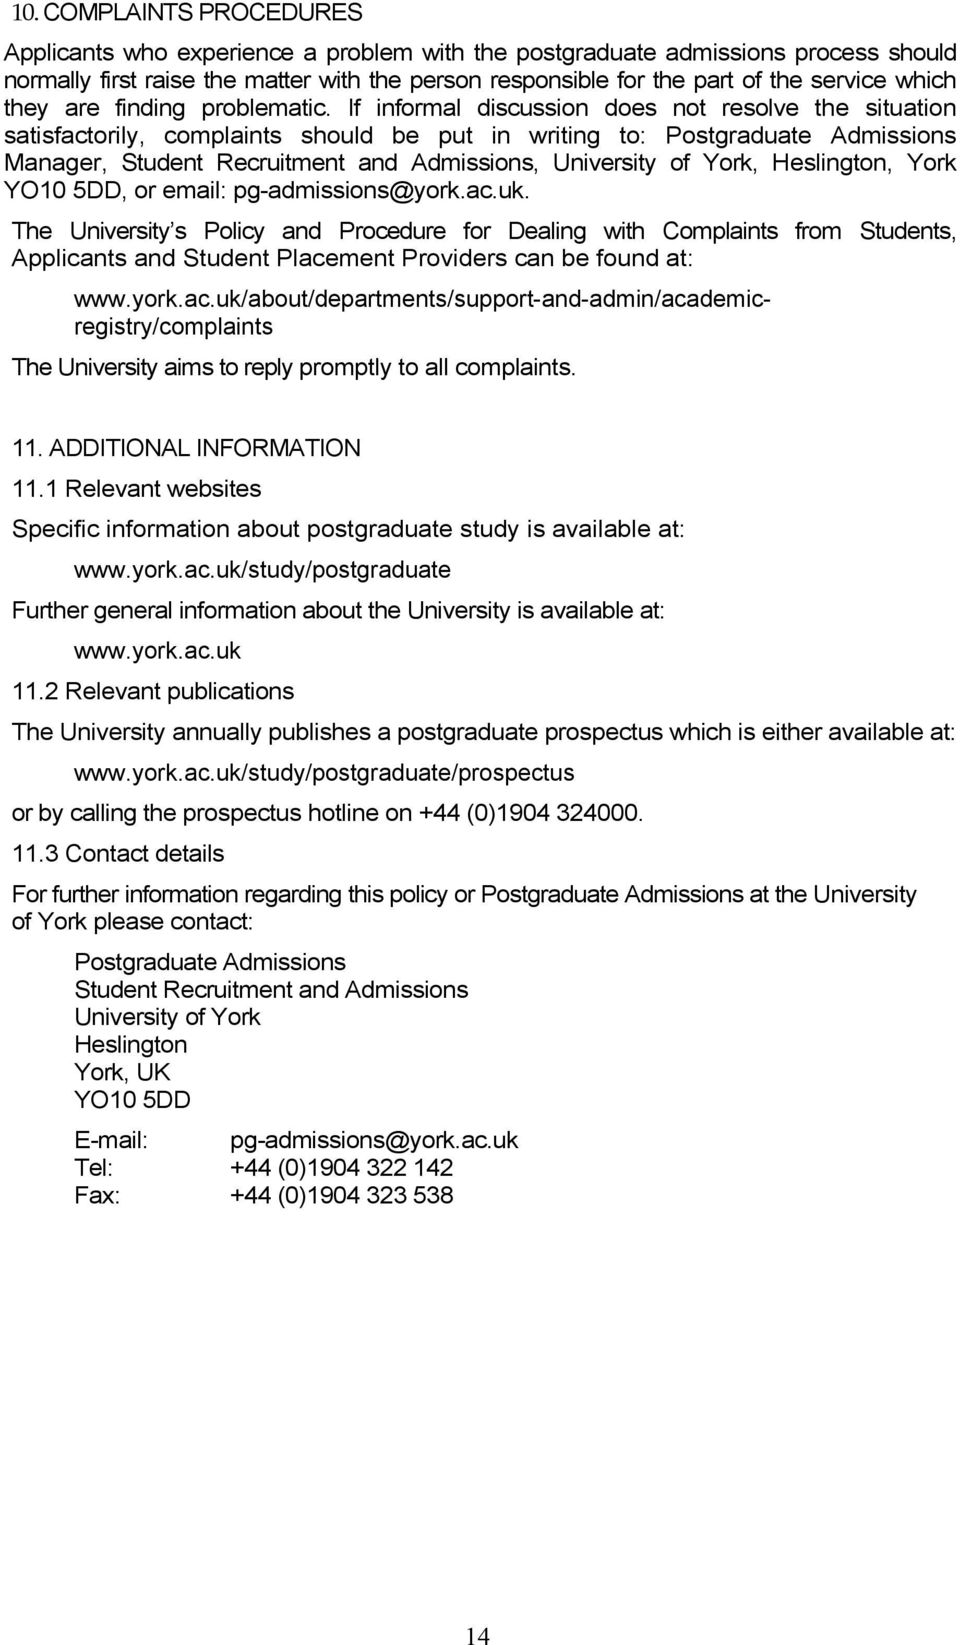 If informal discussion does not resolve the situation satisfactorily, complaints should be put in writing to: Postgraduate Admissions Manager, Student Recruitment and Admissions, University of York,